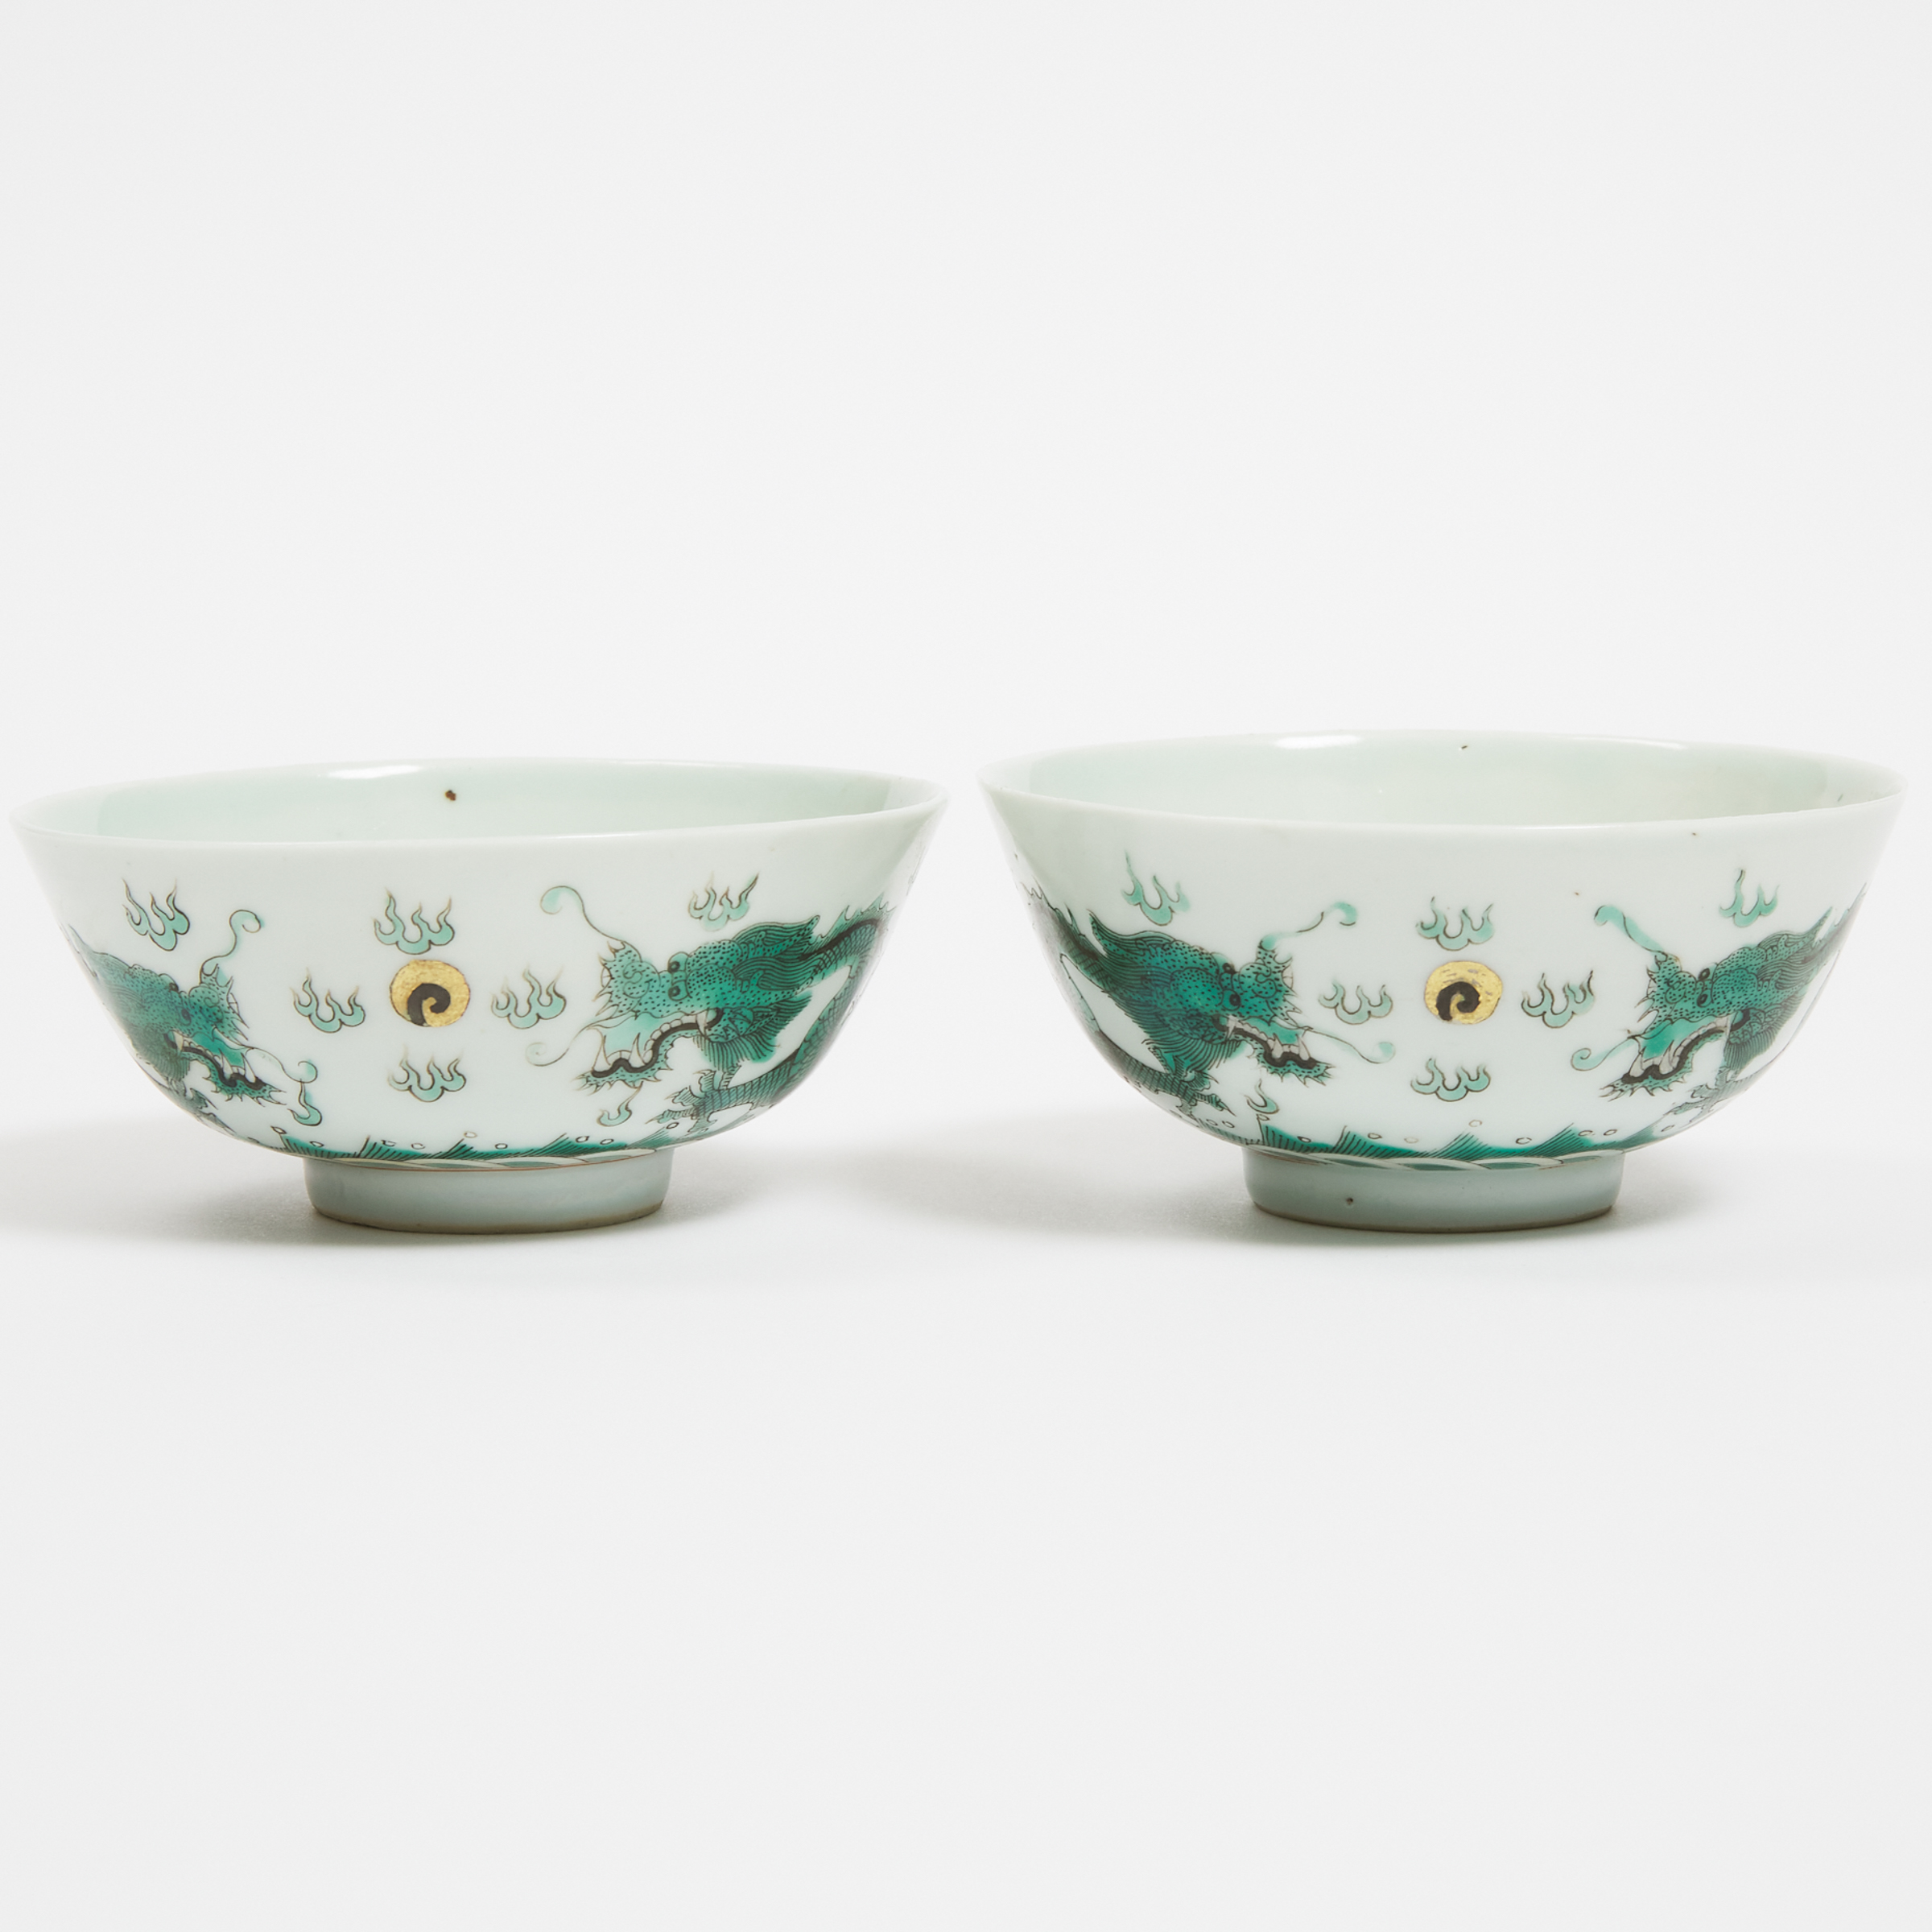 A Pair of Green Enameled 'Double Dragon Chasing Flaming Pearl' Bowls, Guangxu Mark, 20th Century